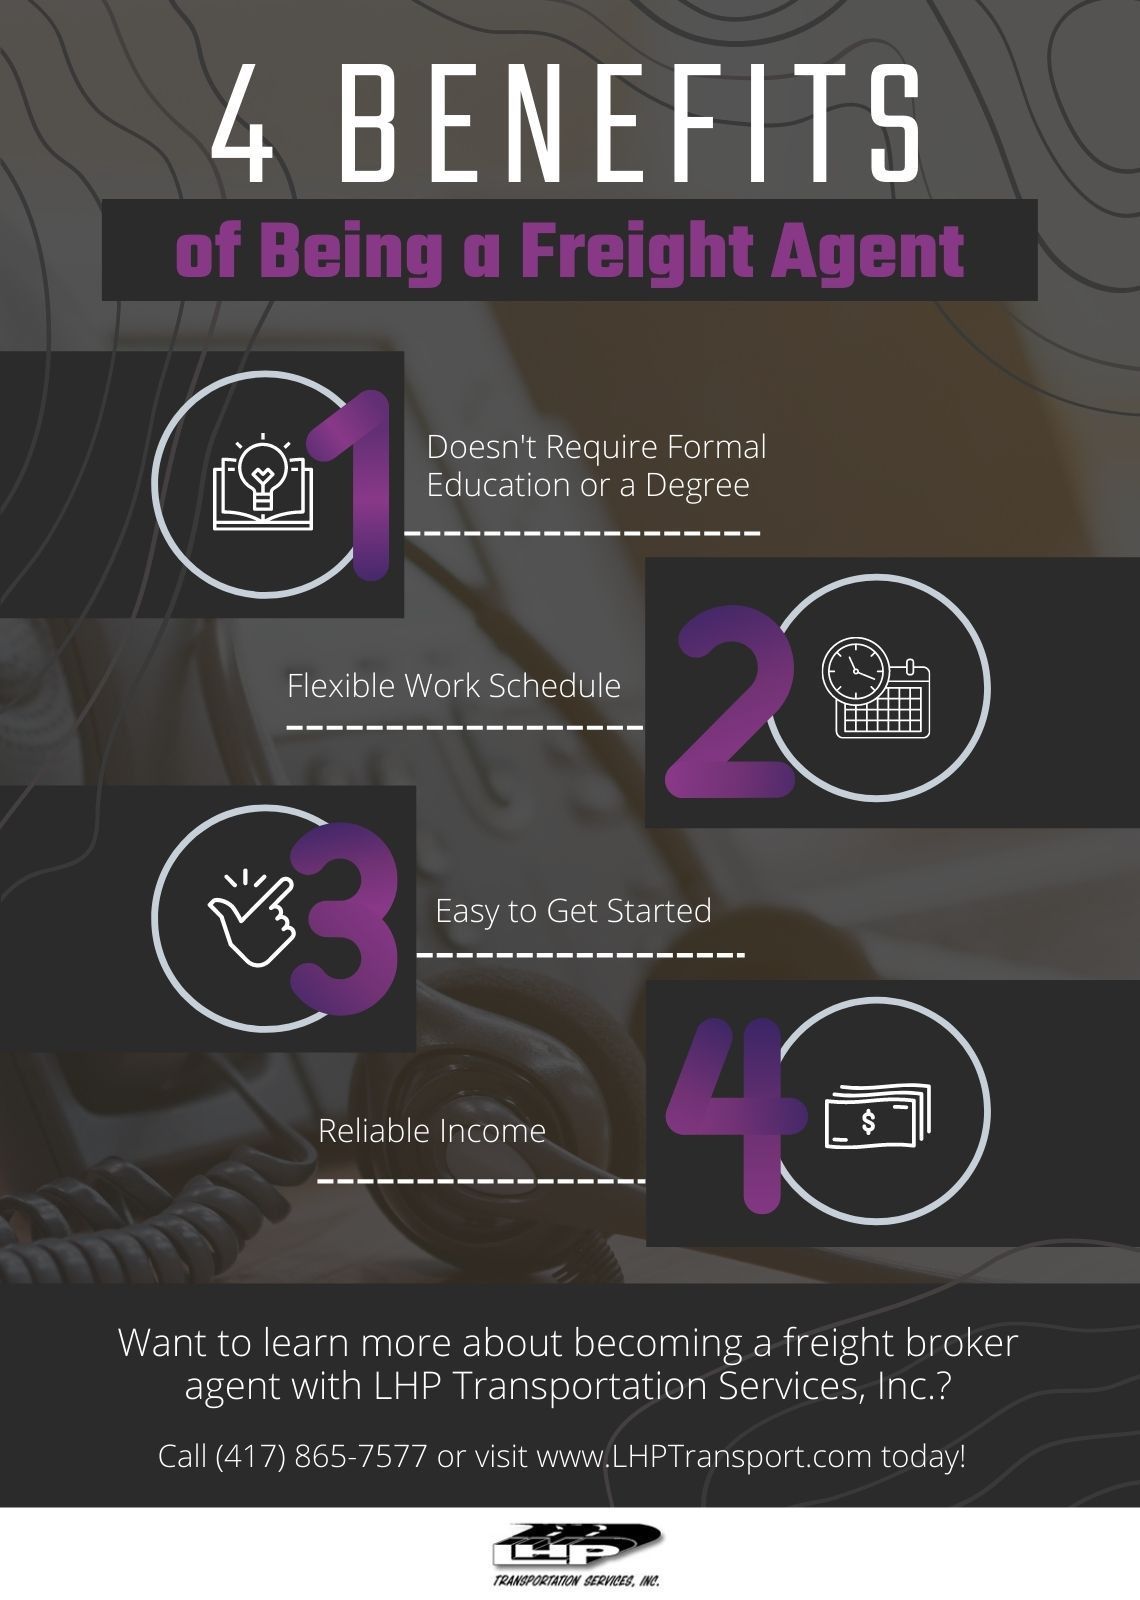 A poster explaining the benefits of being a freight agent